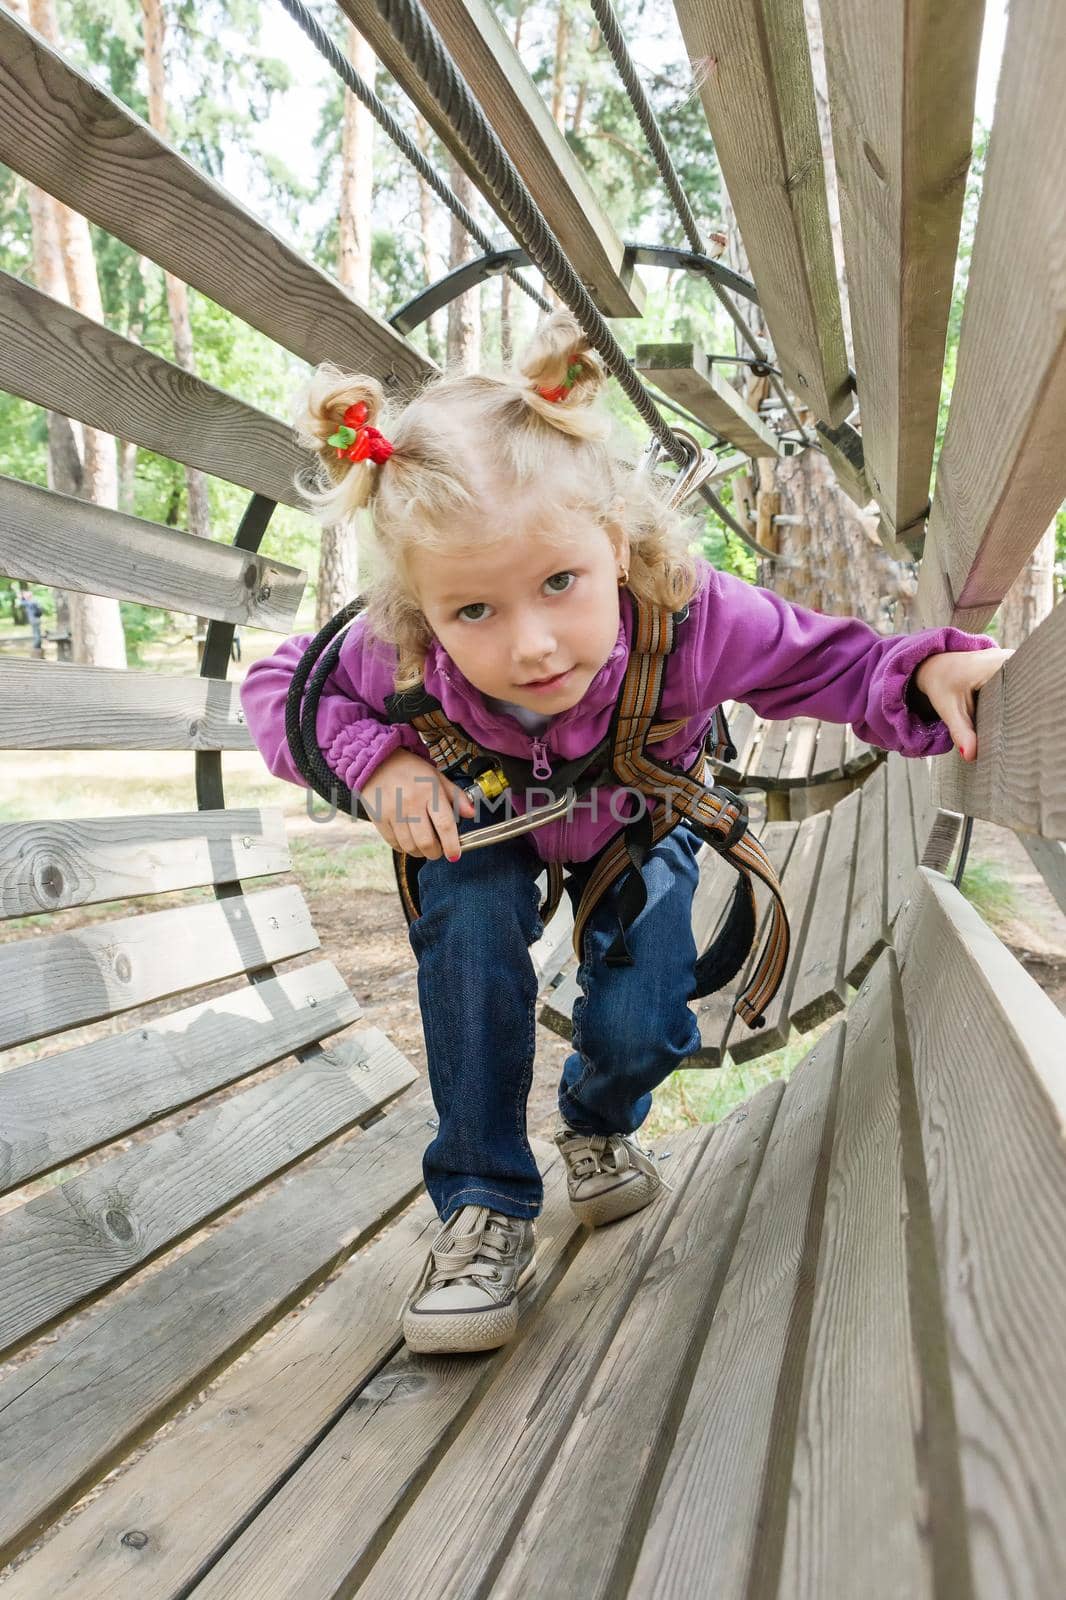 The girl is 4 years old in adventure climbing high wire park, active lifestyle of children.